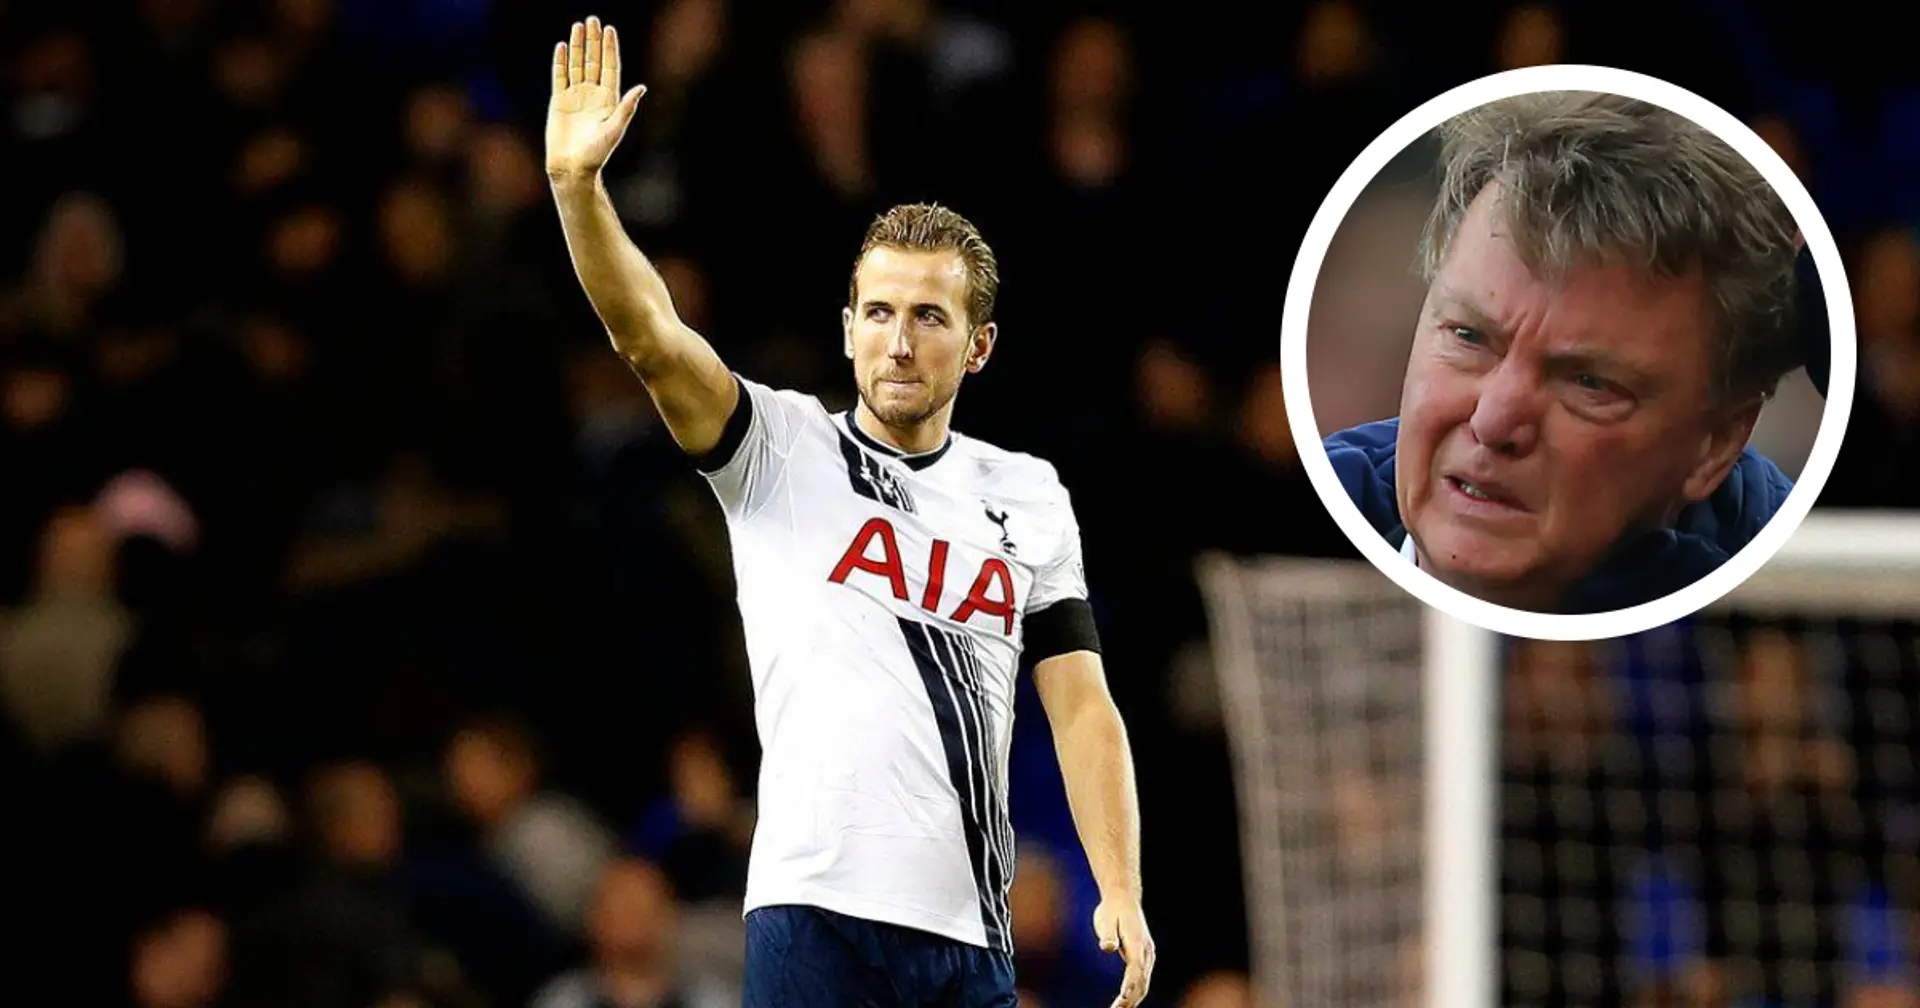 'He's not worth £45m. Plus, what happens to James Wilson?': what Man United fans said about Kane in 2015